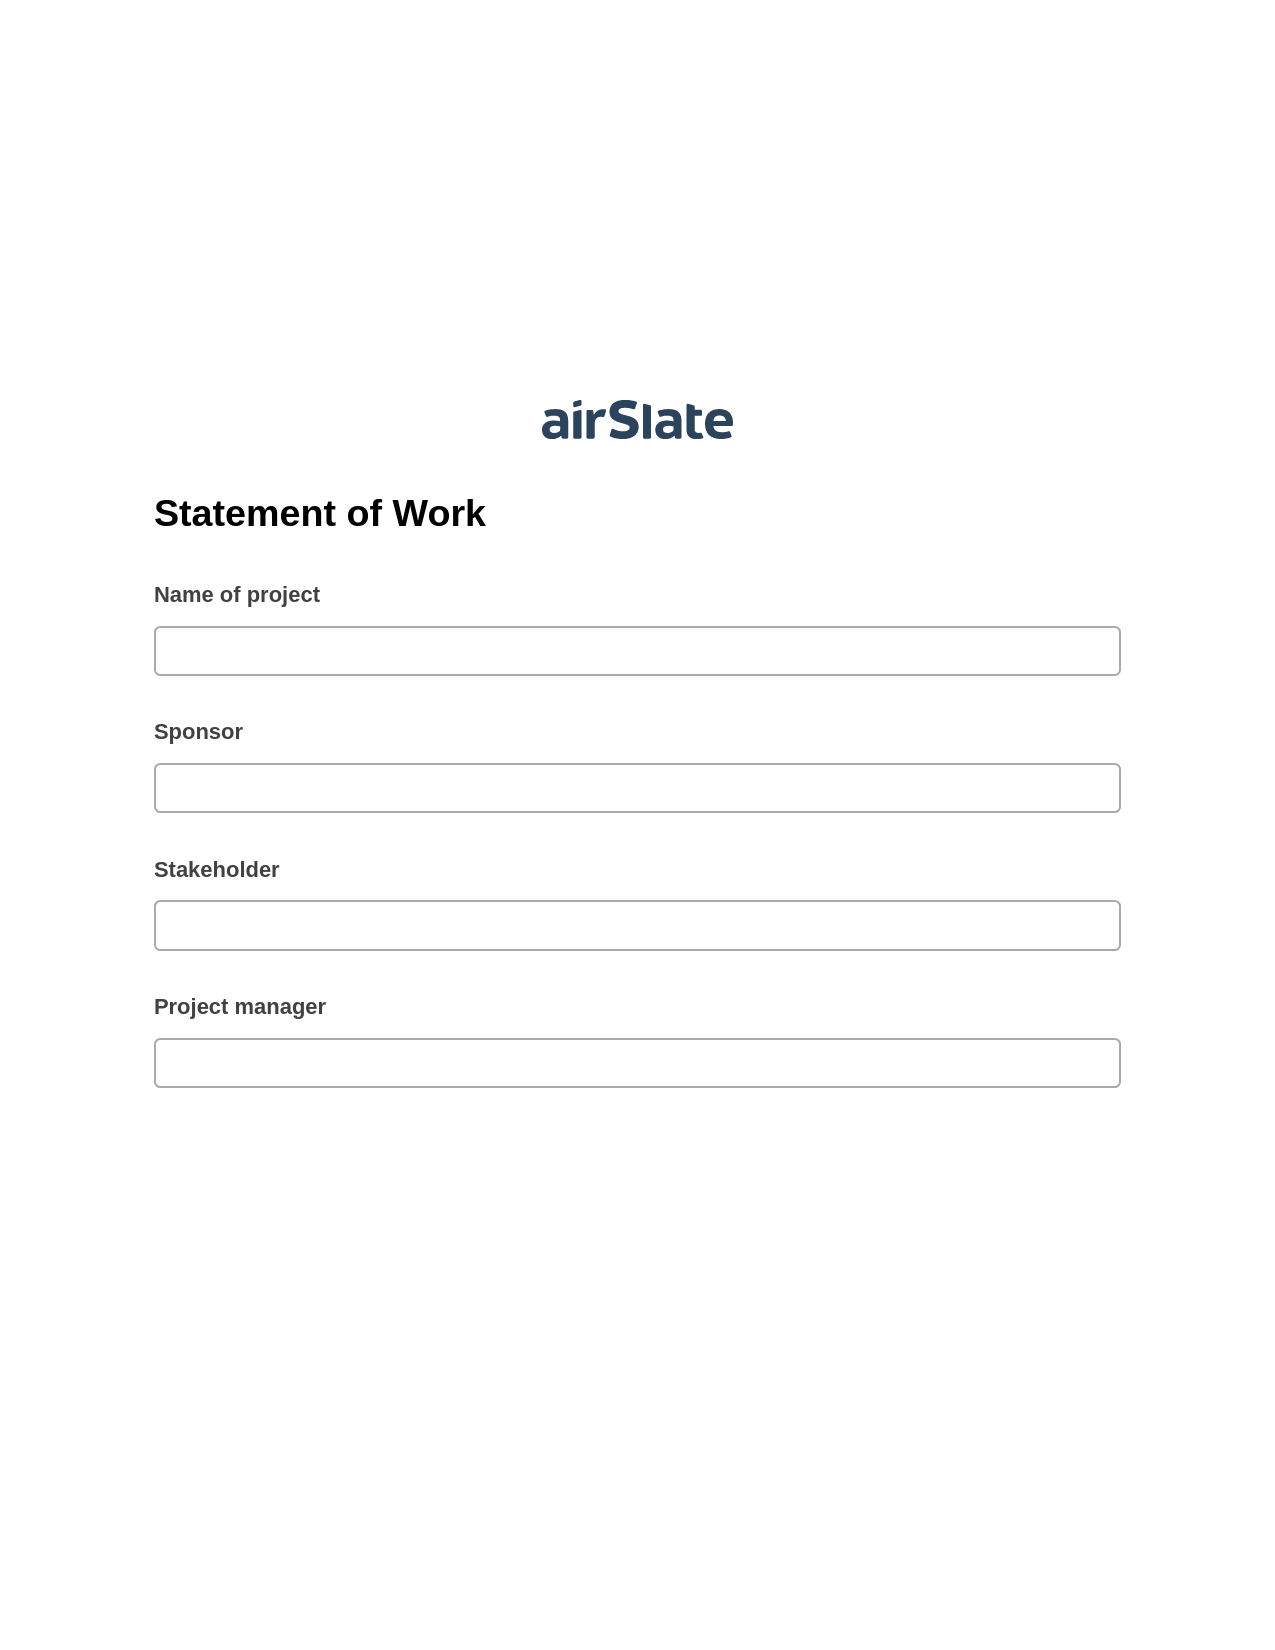 Multirole Statement of Work Pre-fill Document Bot, Remove Tags From Slate Bot, Post-finish Document Bot